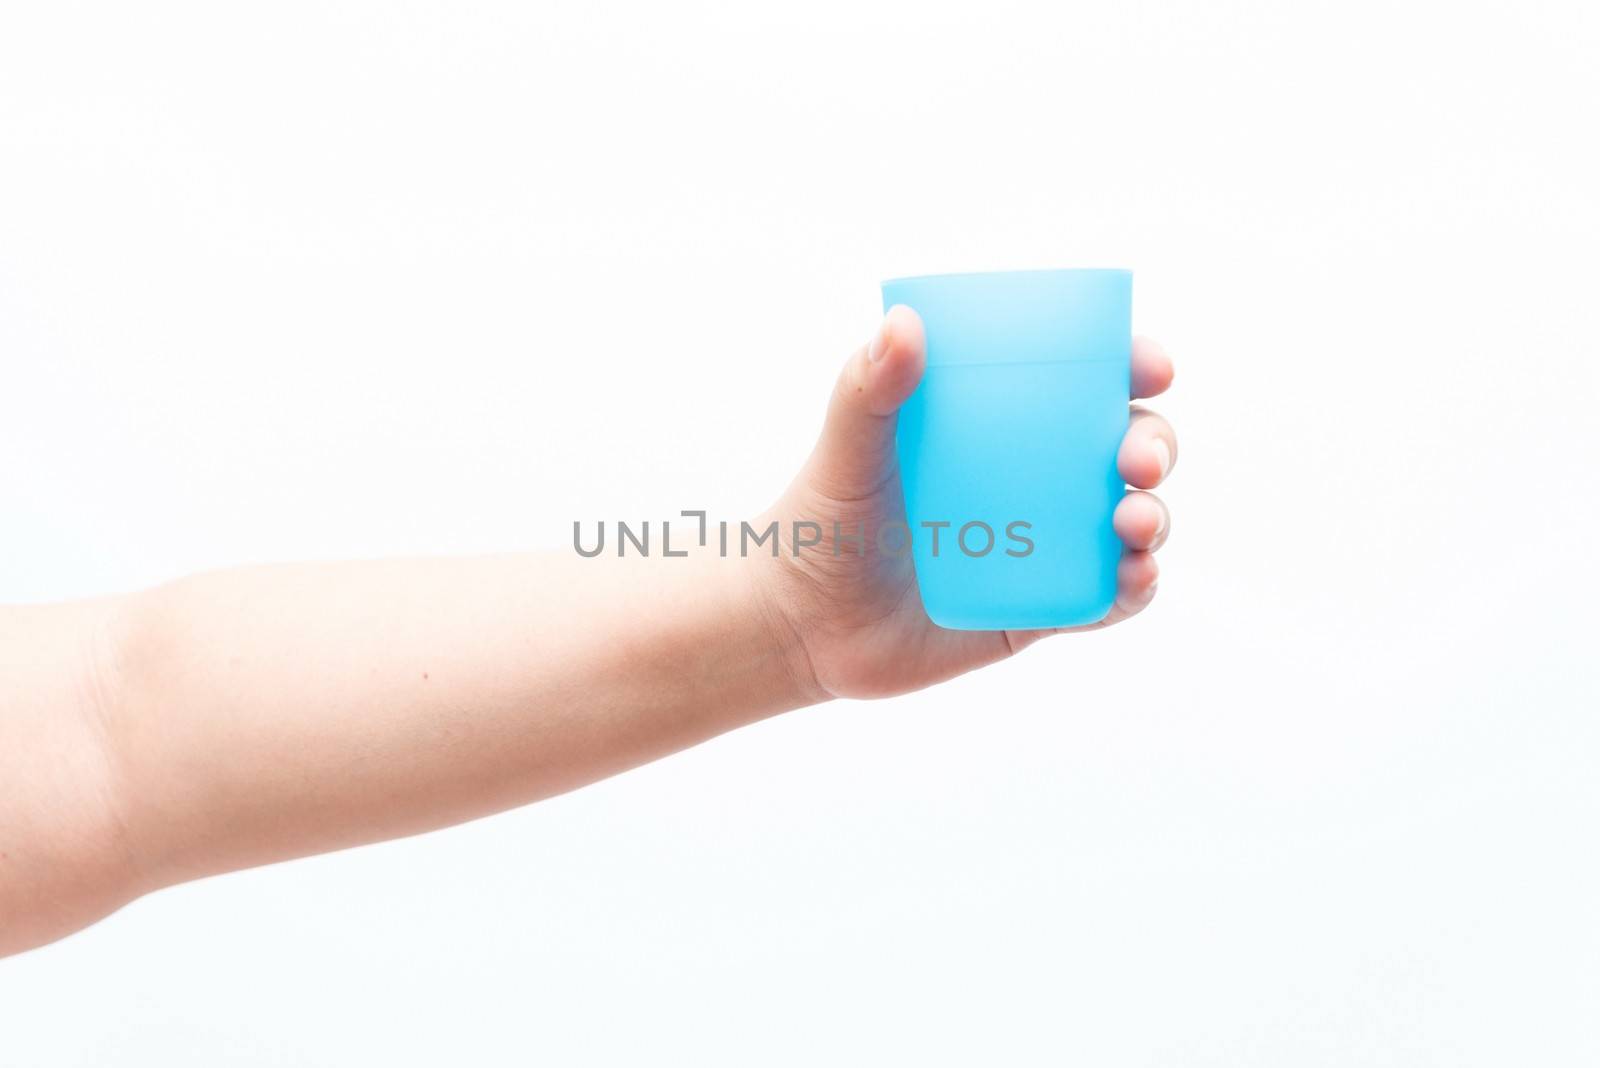 Asian woman holding a small plastic cup by sasilsolutions